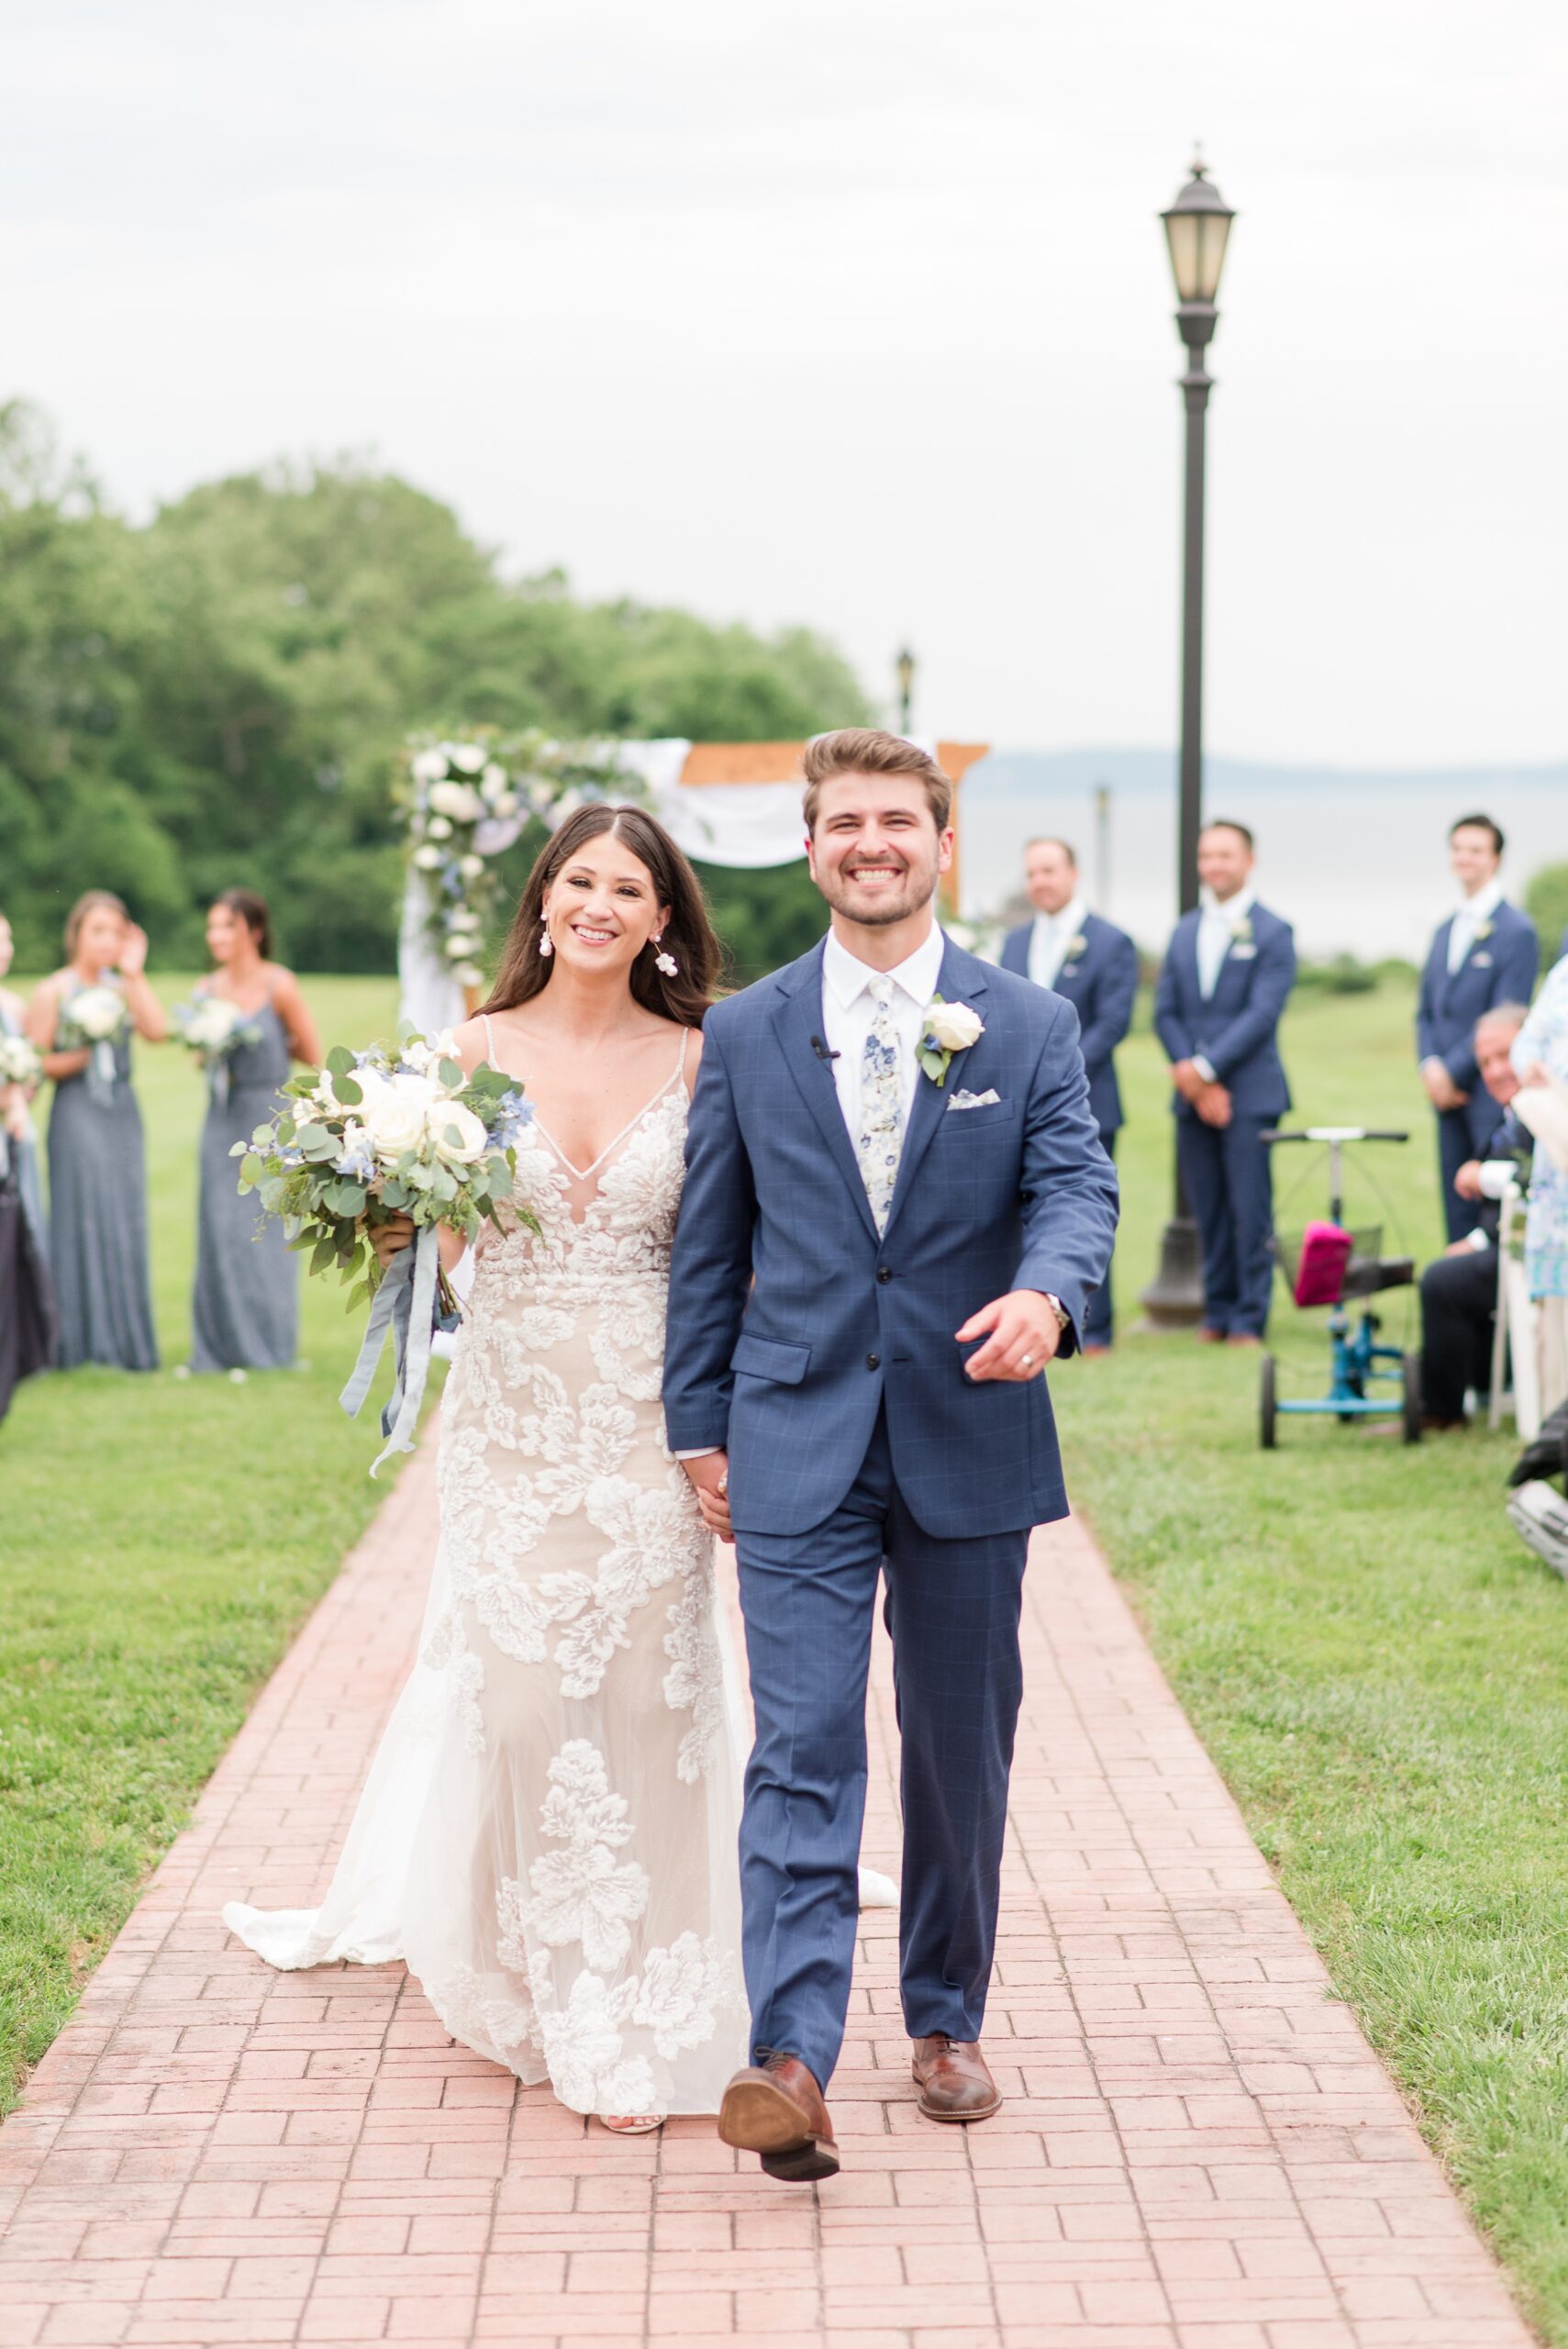 Newlyweds walk back up the aisle holding hands and beaming after their Swan Harbor Farm Wedding ceremony